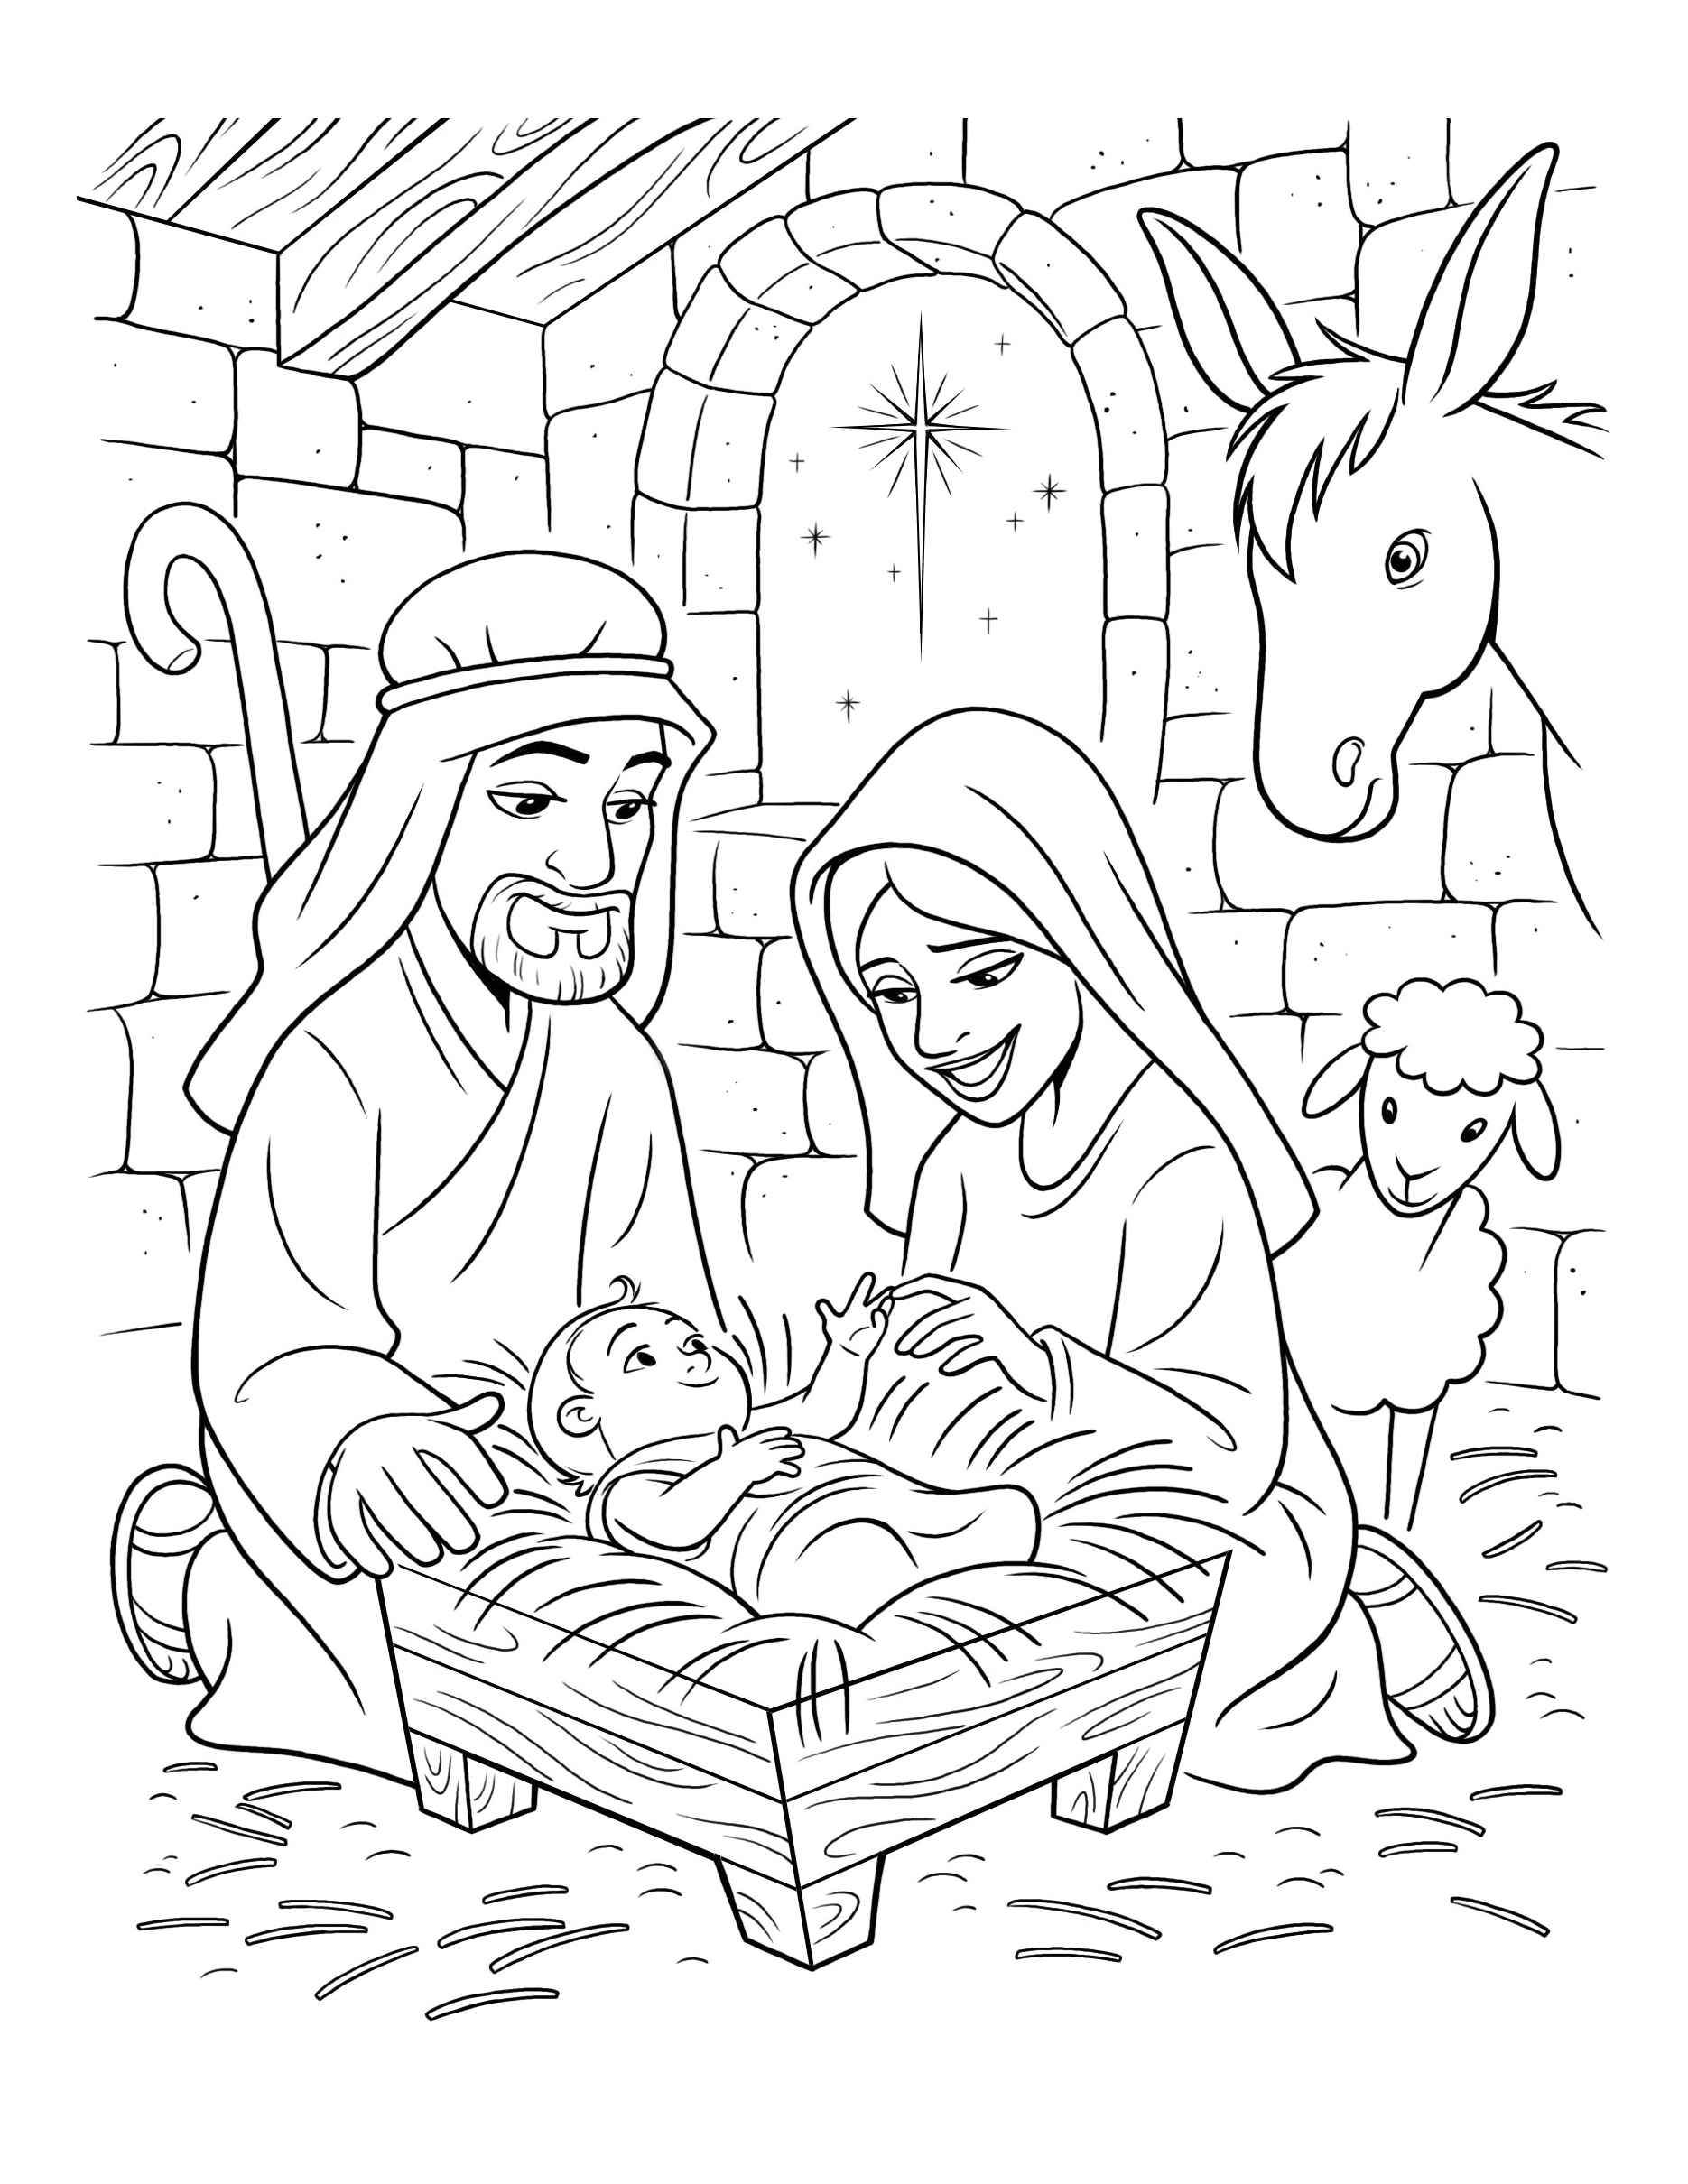 Birth of Christ coloring book to print and online